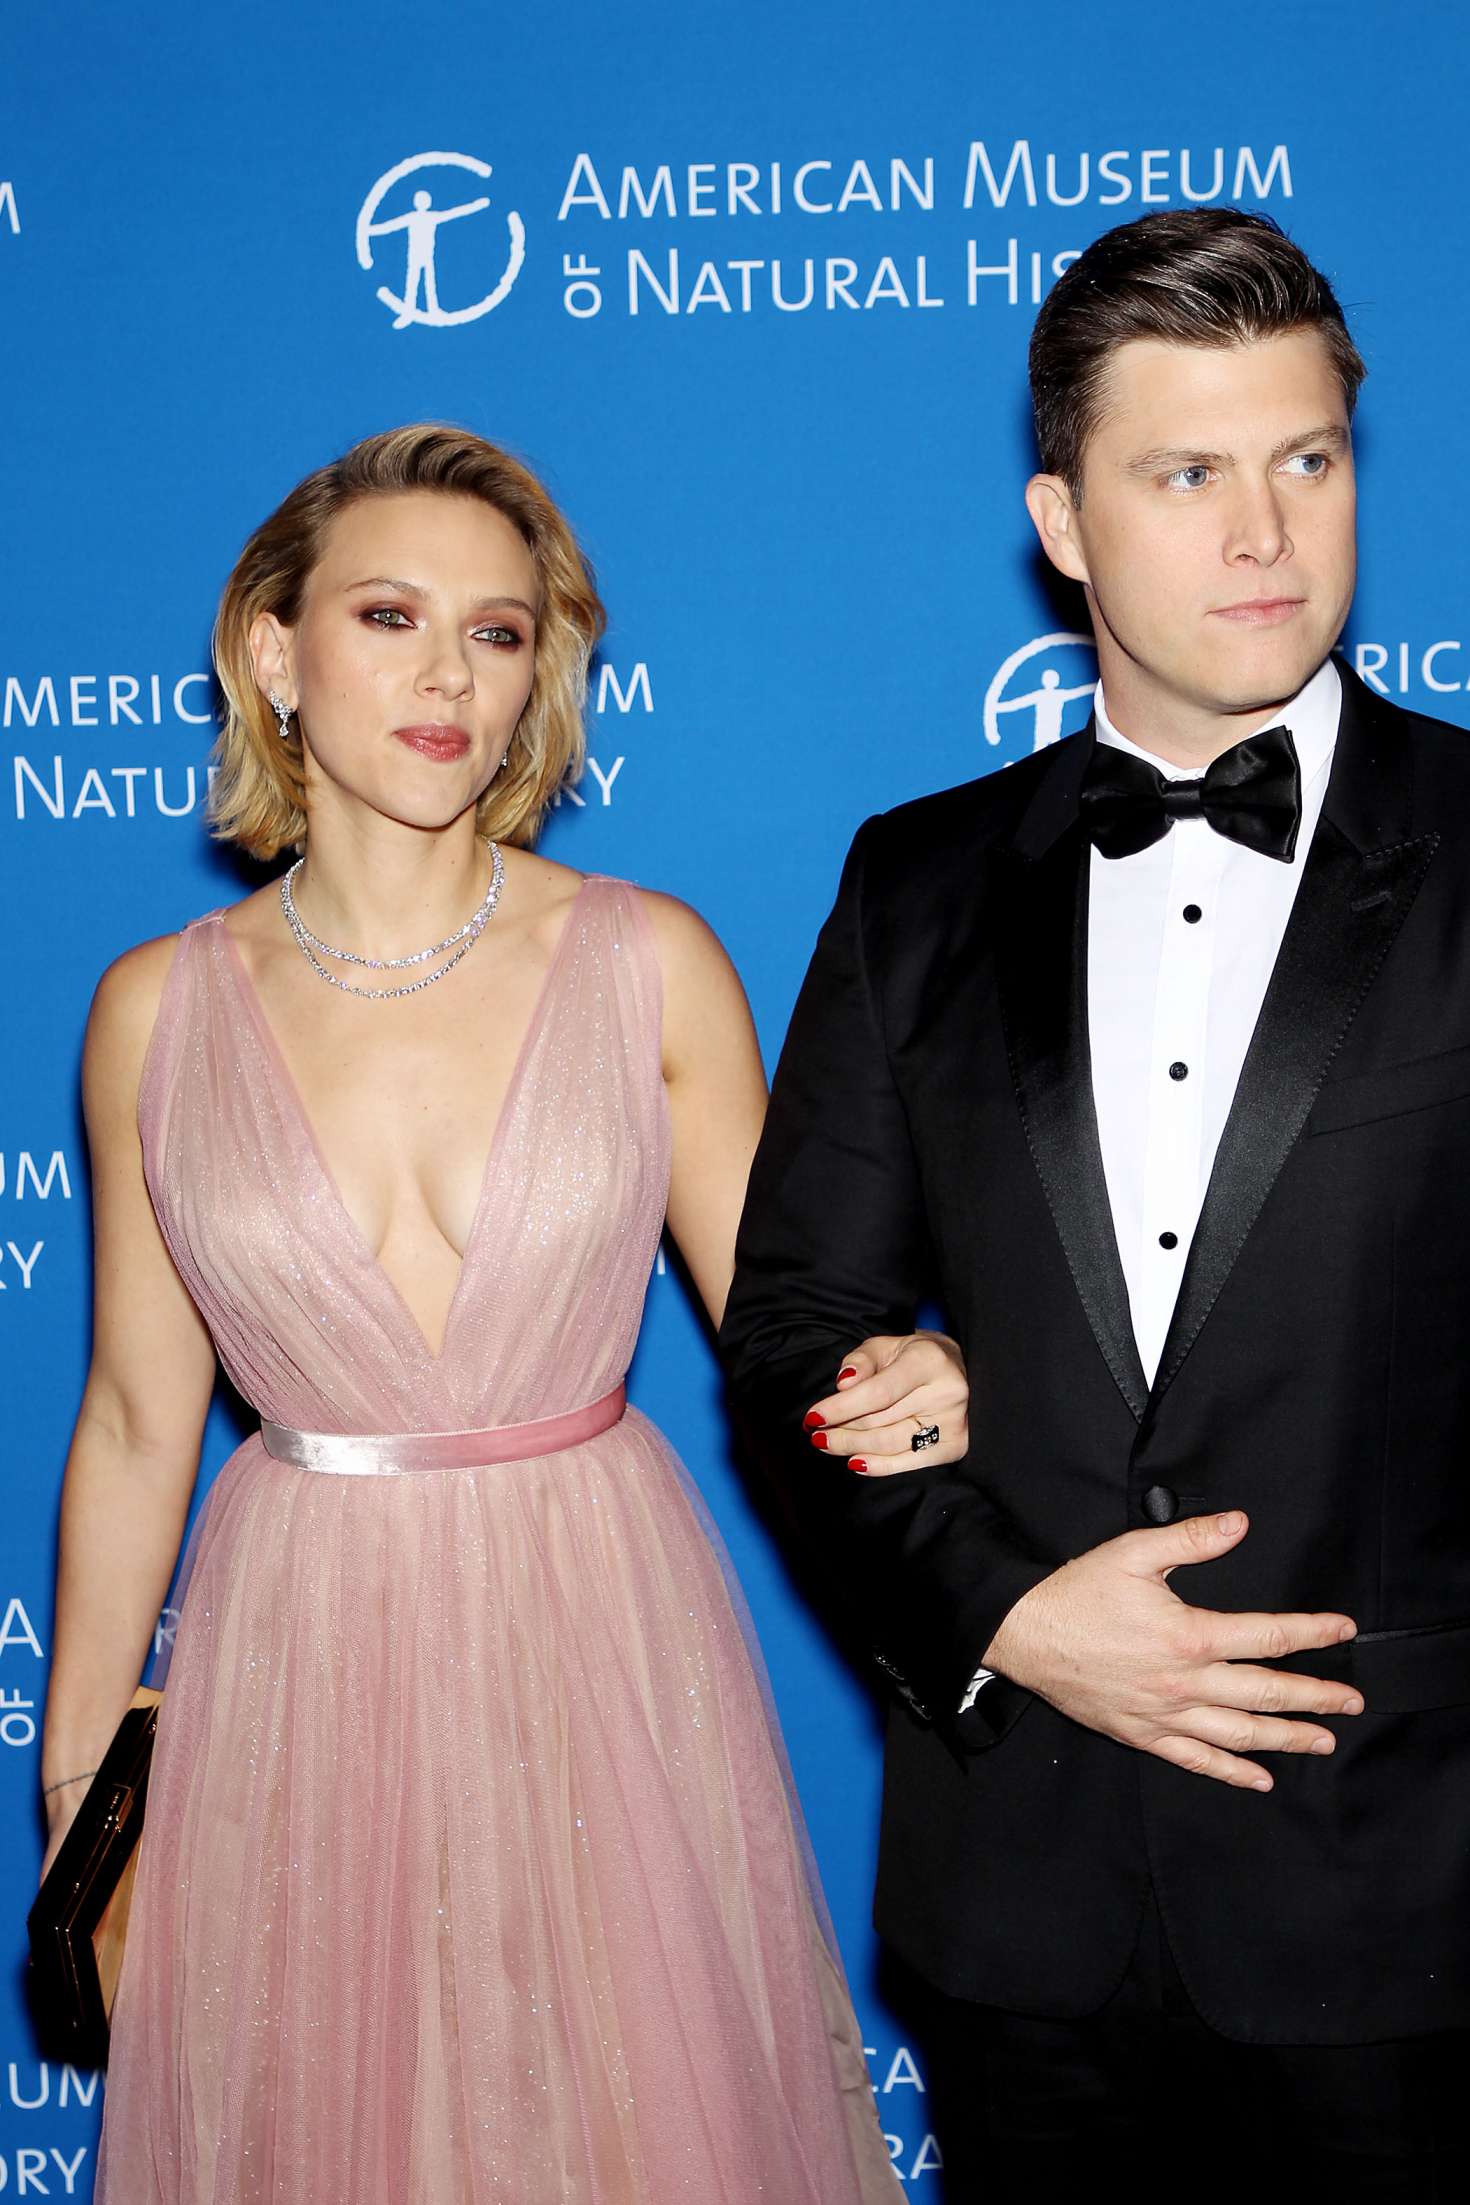 Scarlett Johansson â€“ 2018 American Museum of Natural History Gala in NYC